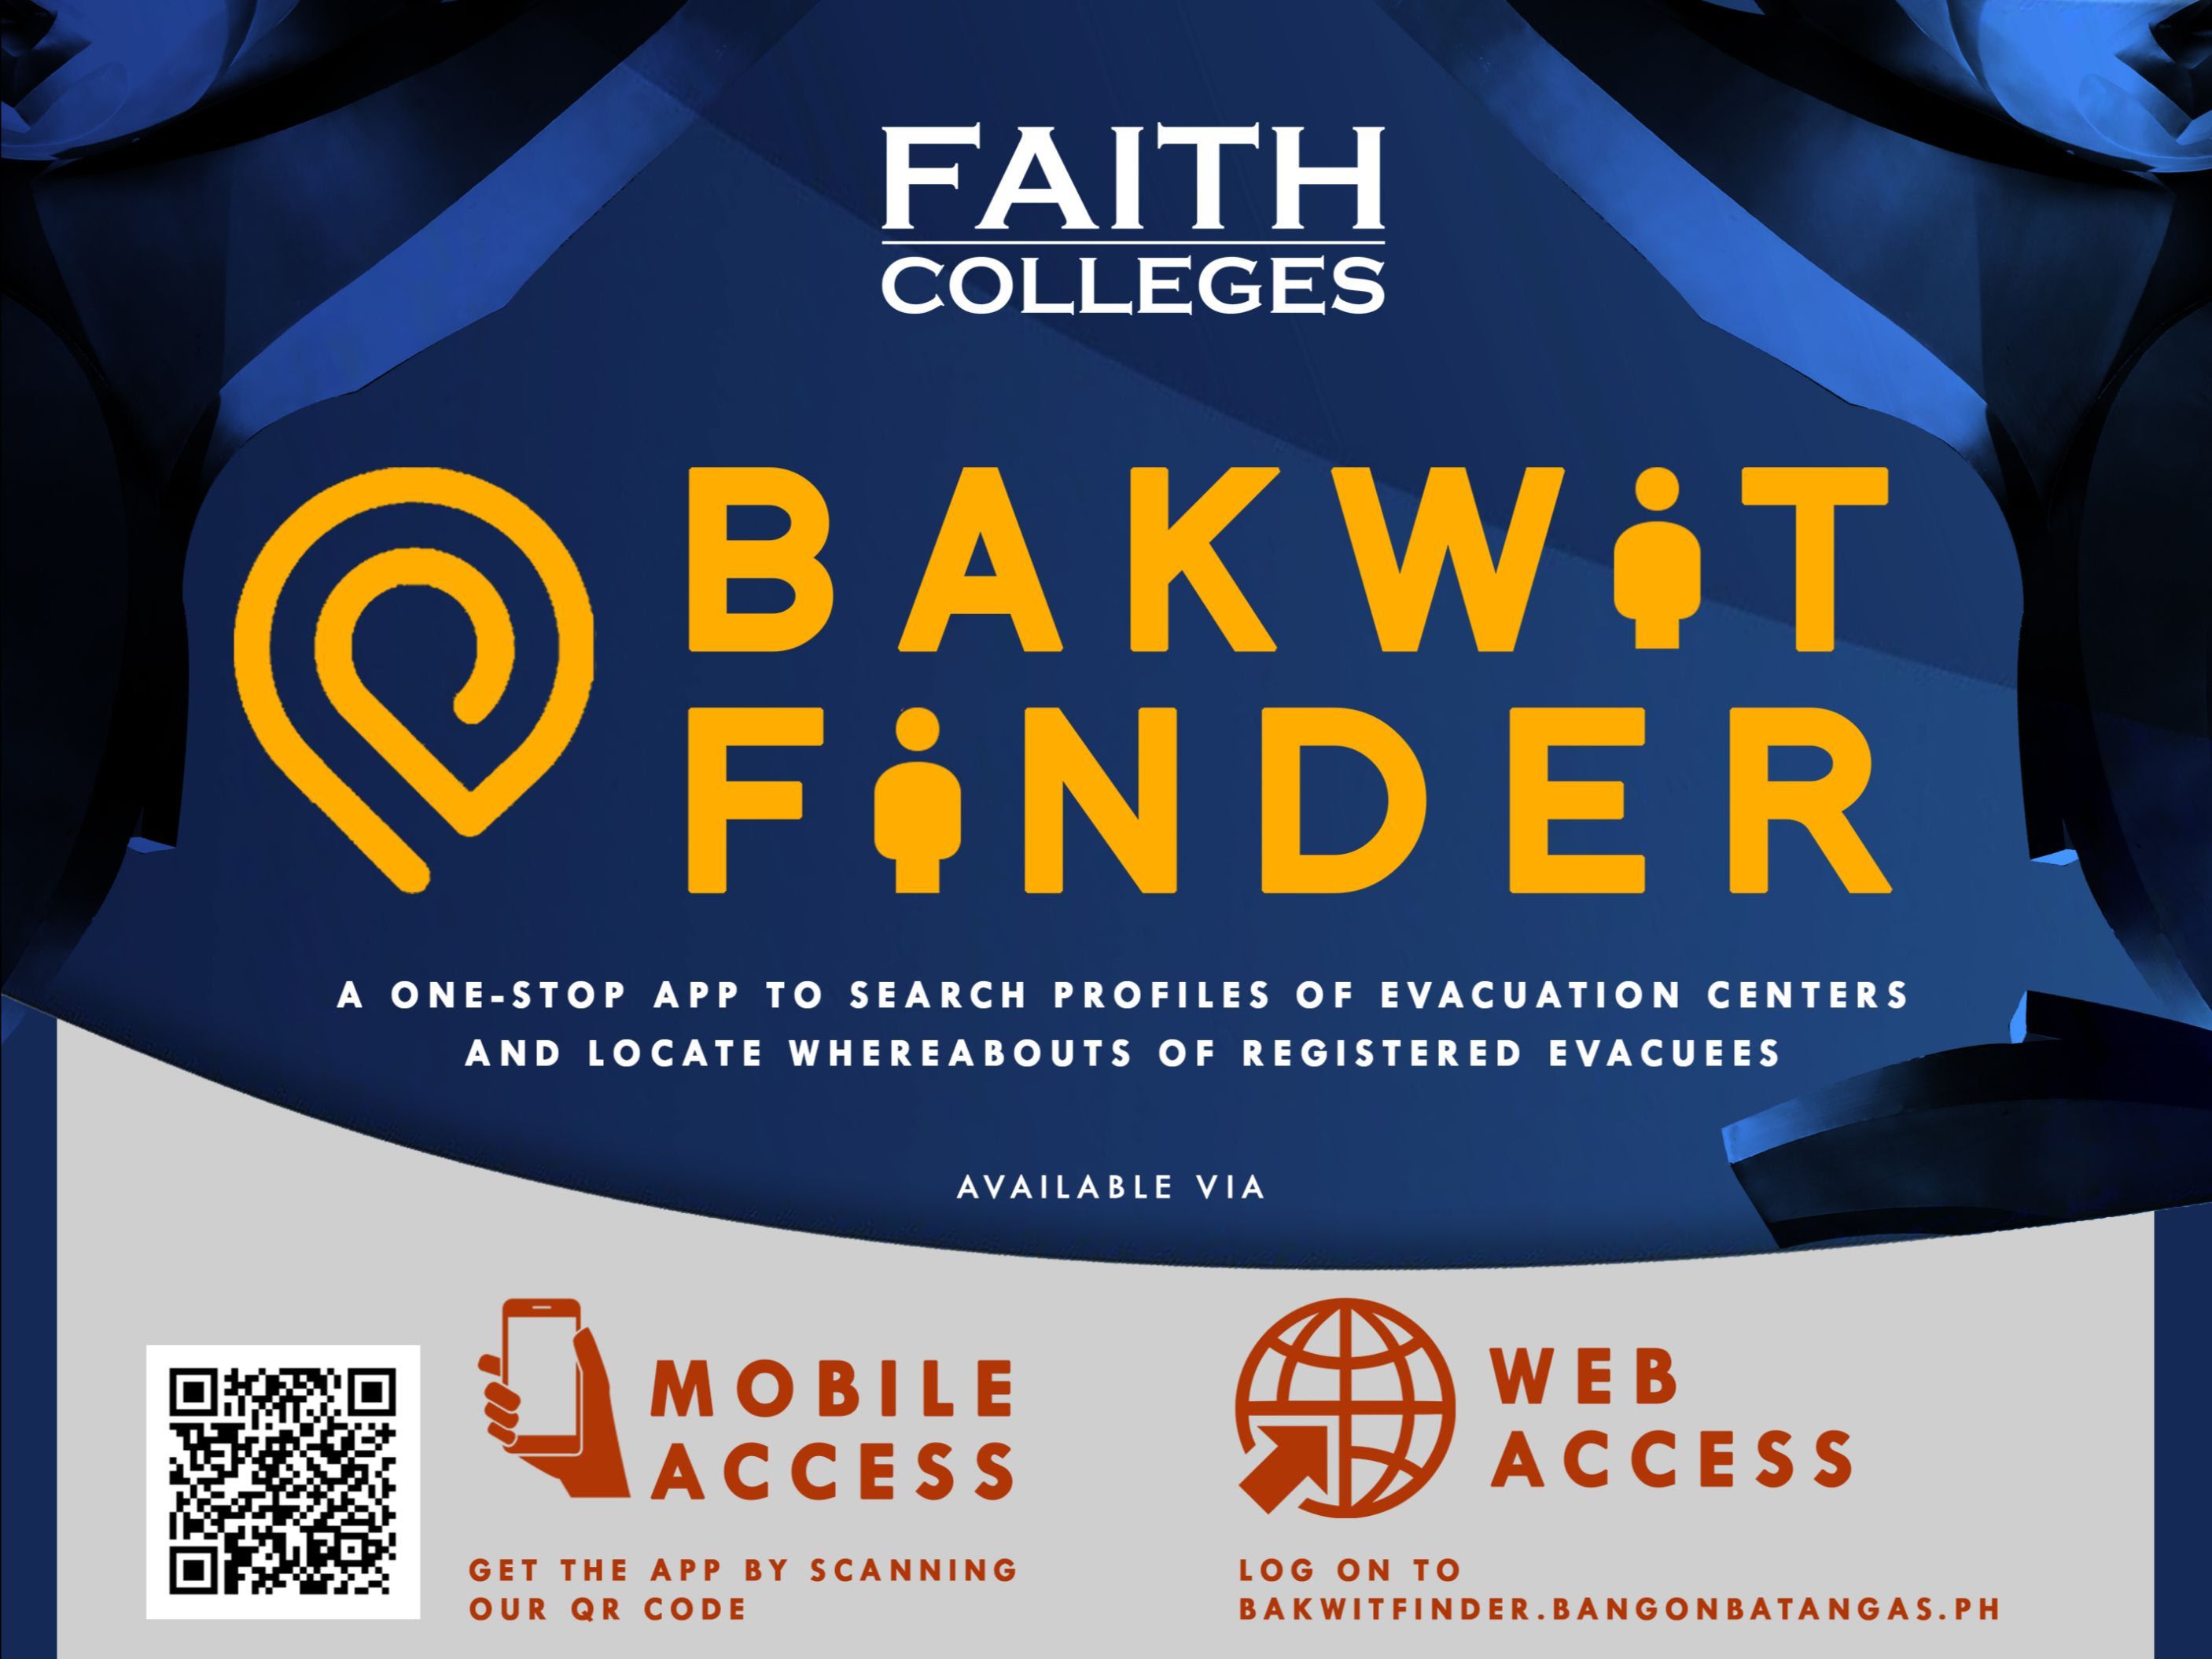 FAITH Colleges launches Bakwitfinder app